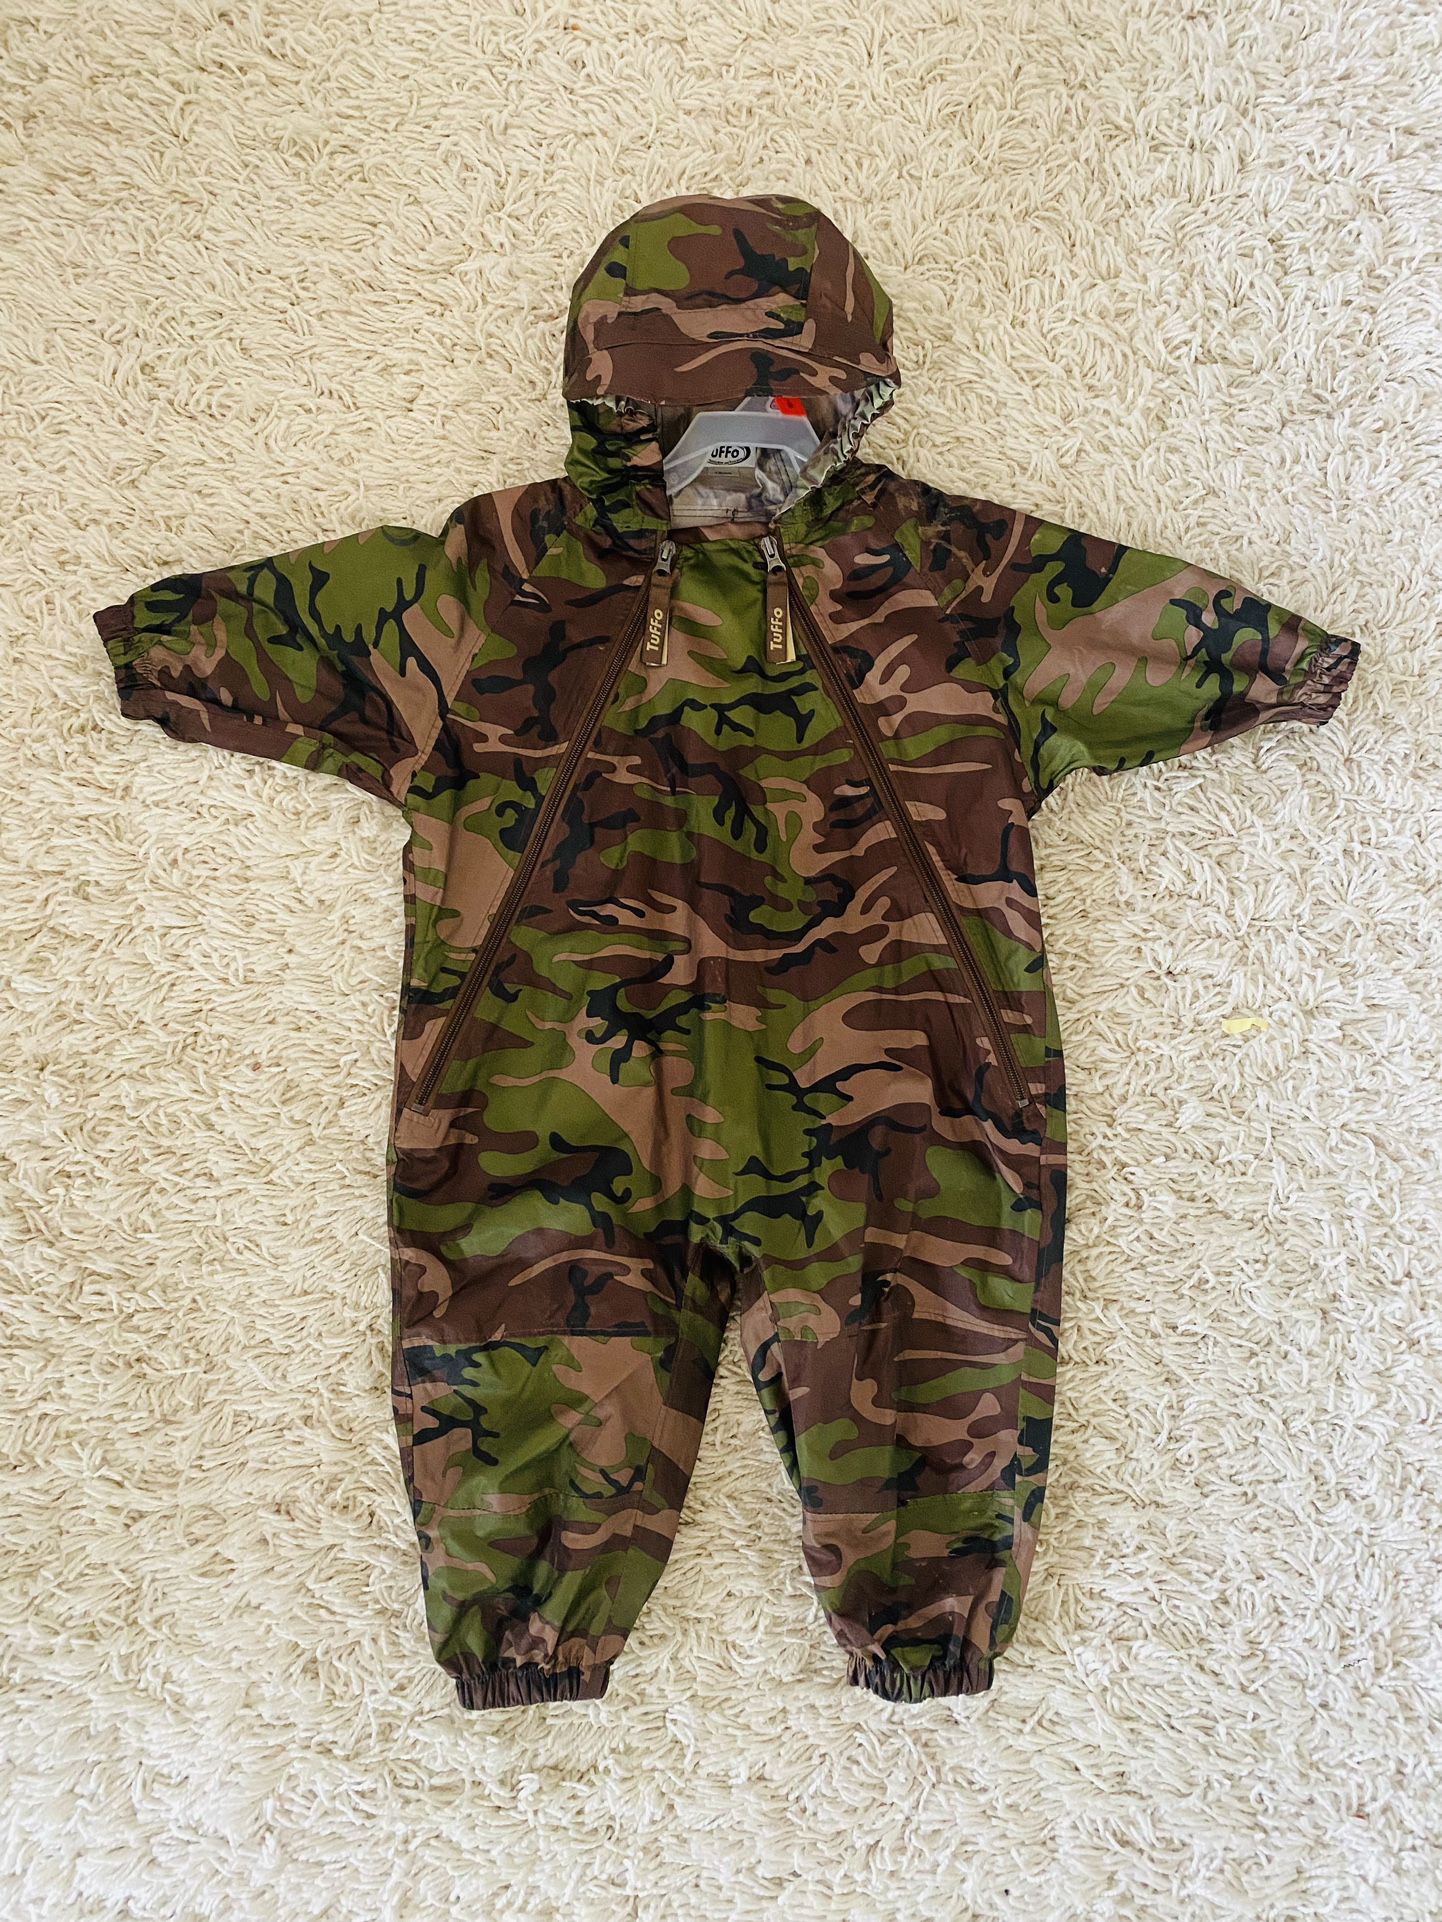 Tuffo Kids Toddler Coverall Rain Suit